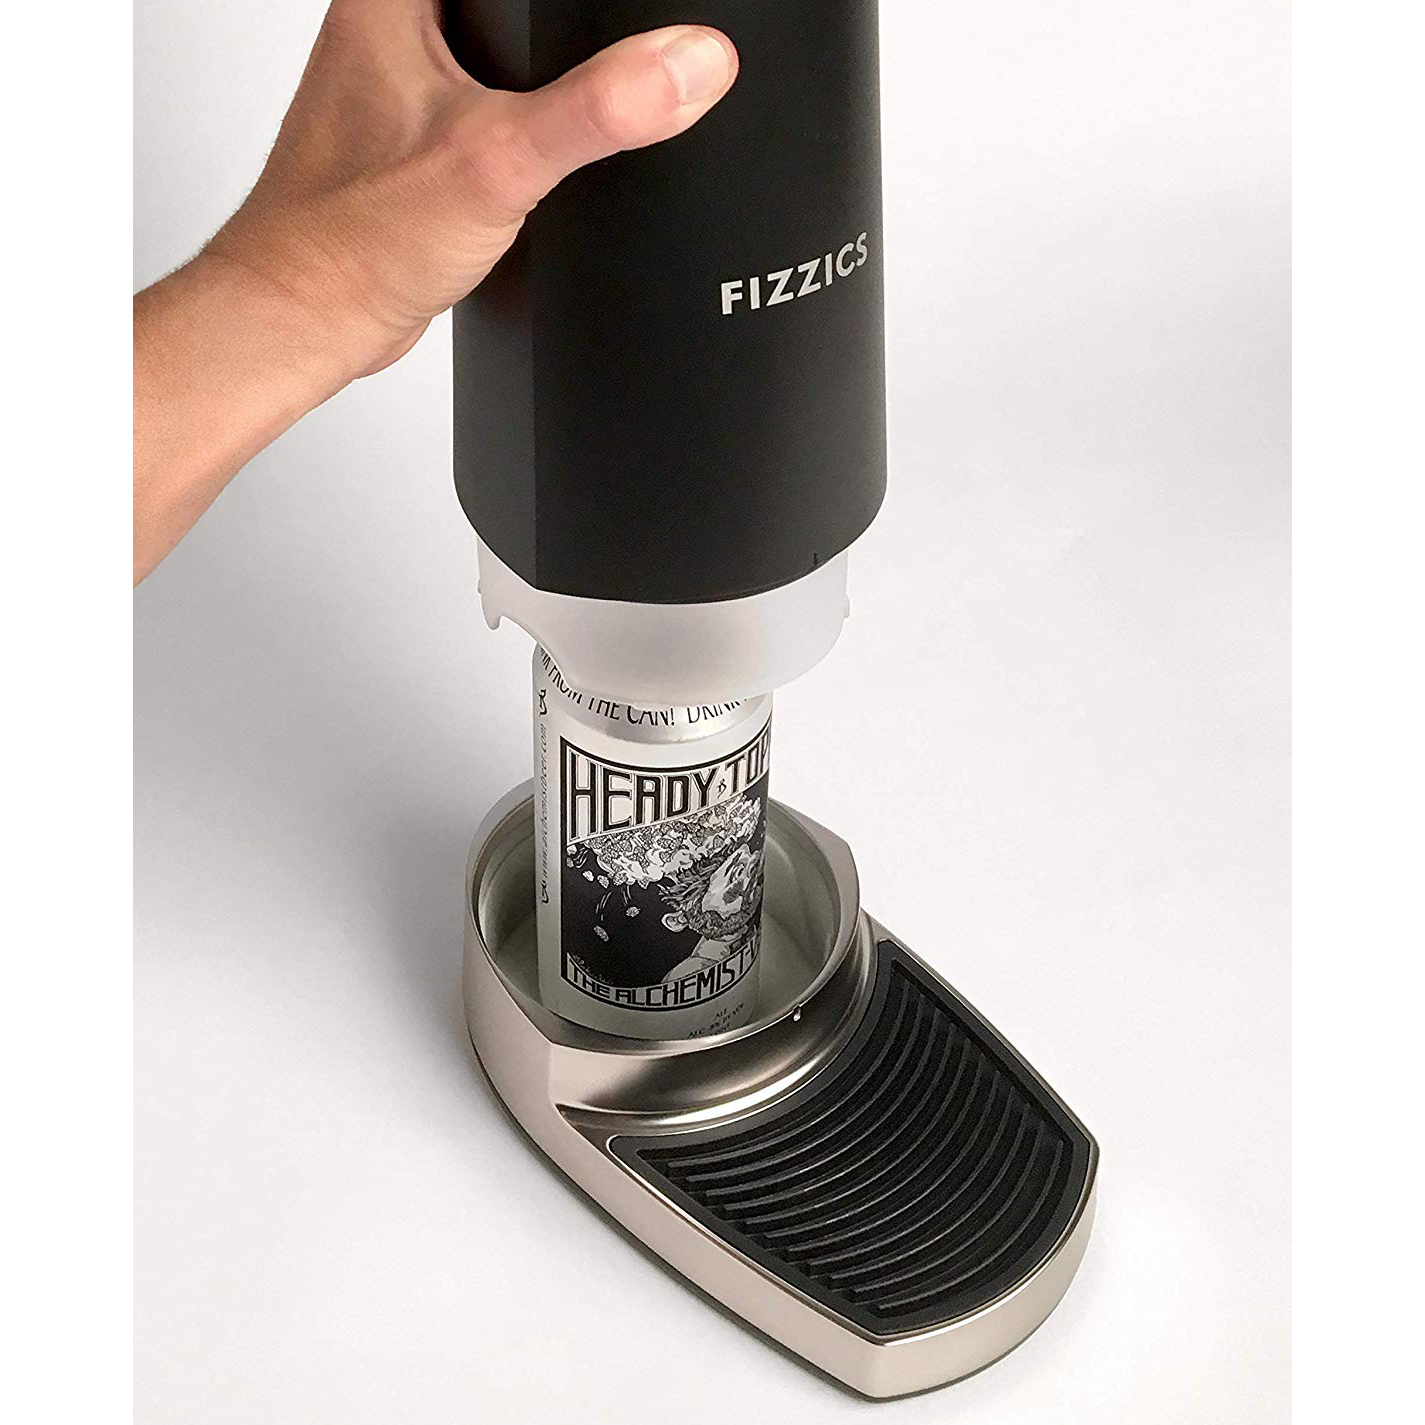 Fizzics FZ403 DraftPour Nitro-Style USB-Powered Home Bar Beer Tap Dispenser - image 5 of 6